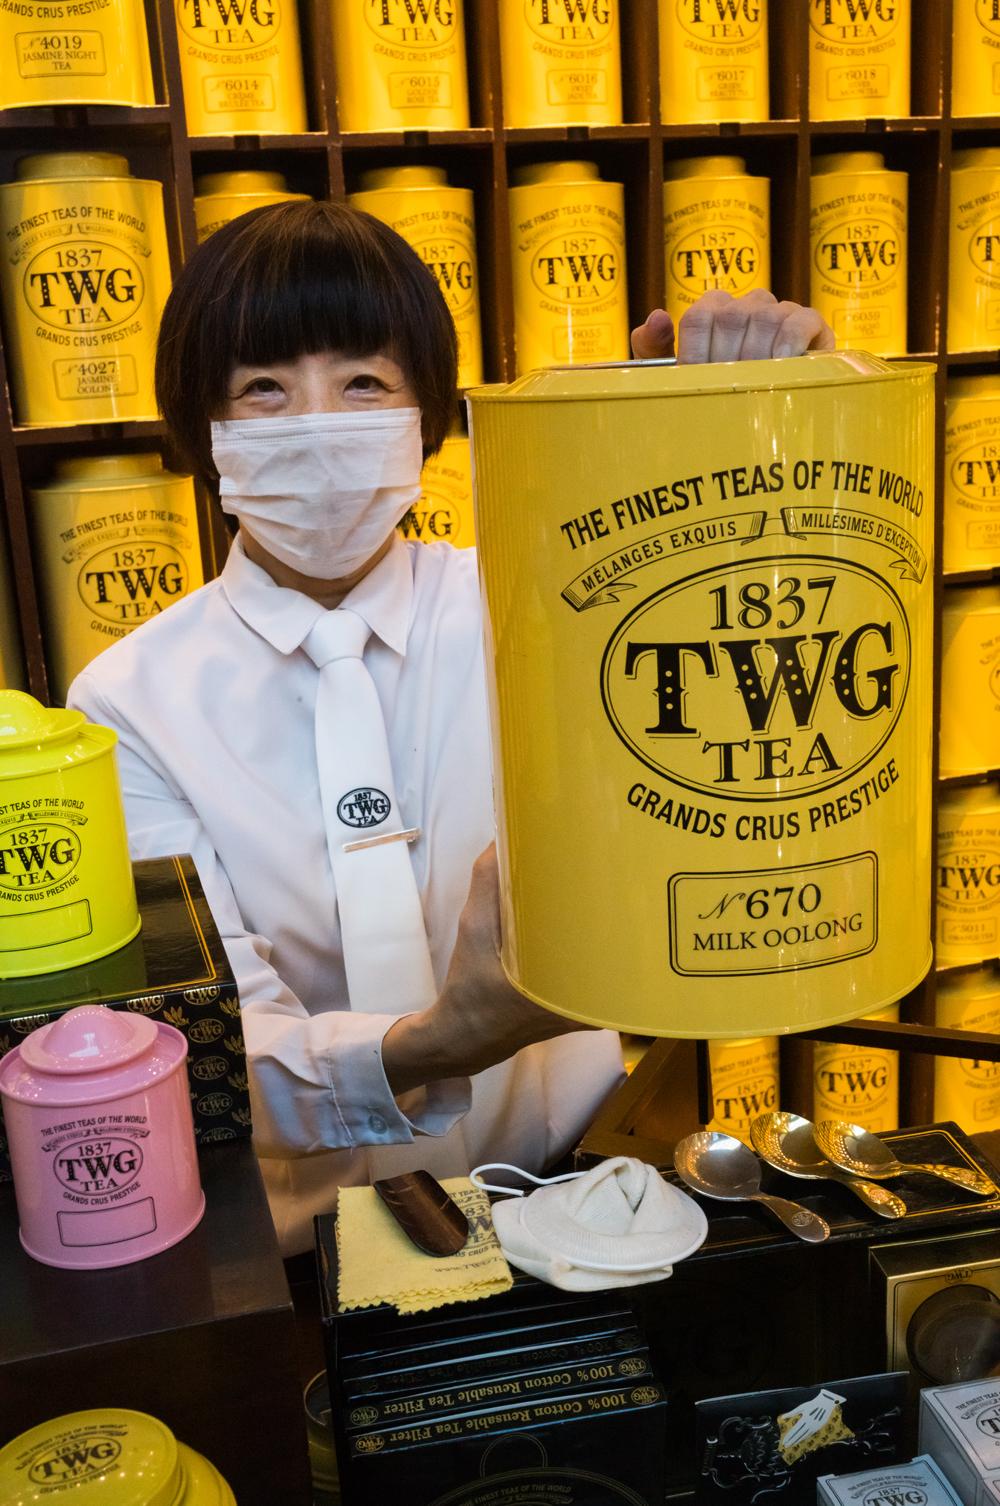 TWG, which is based in Singapore, sells some of the world's rarest and finest teas. (Alan Behr/TNS)